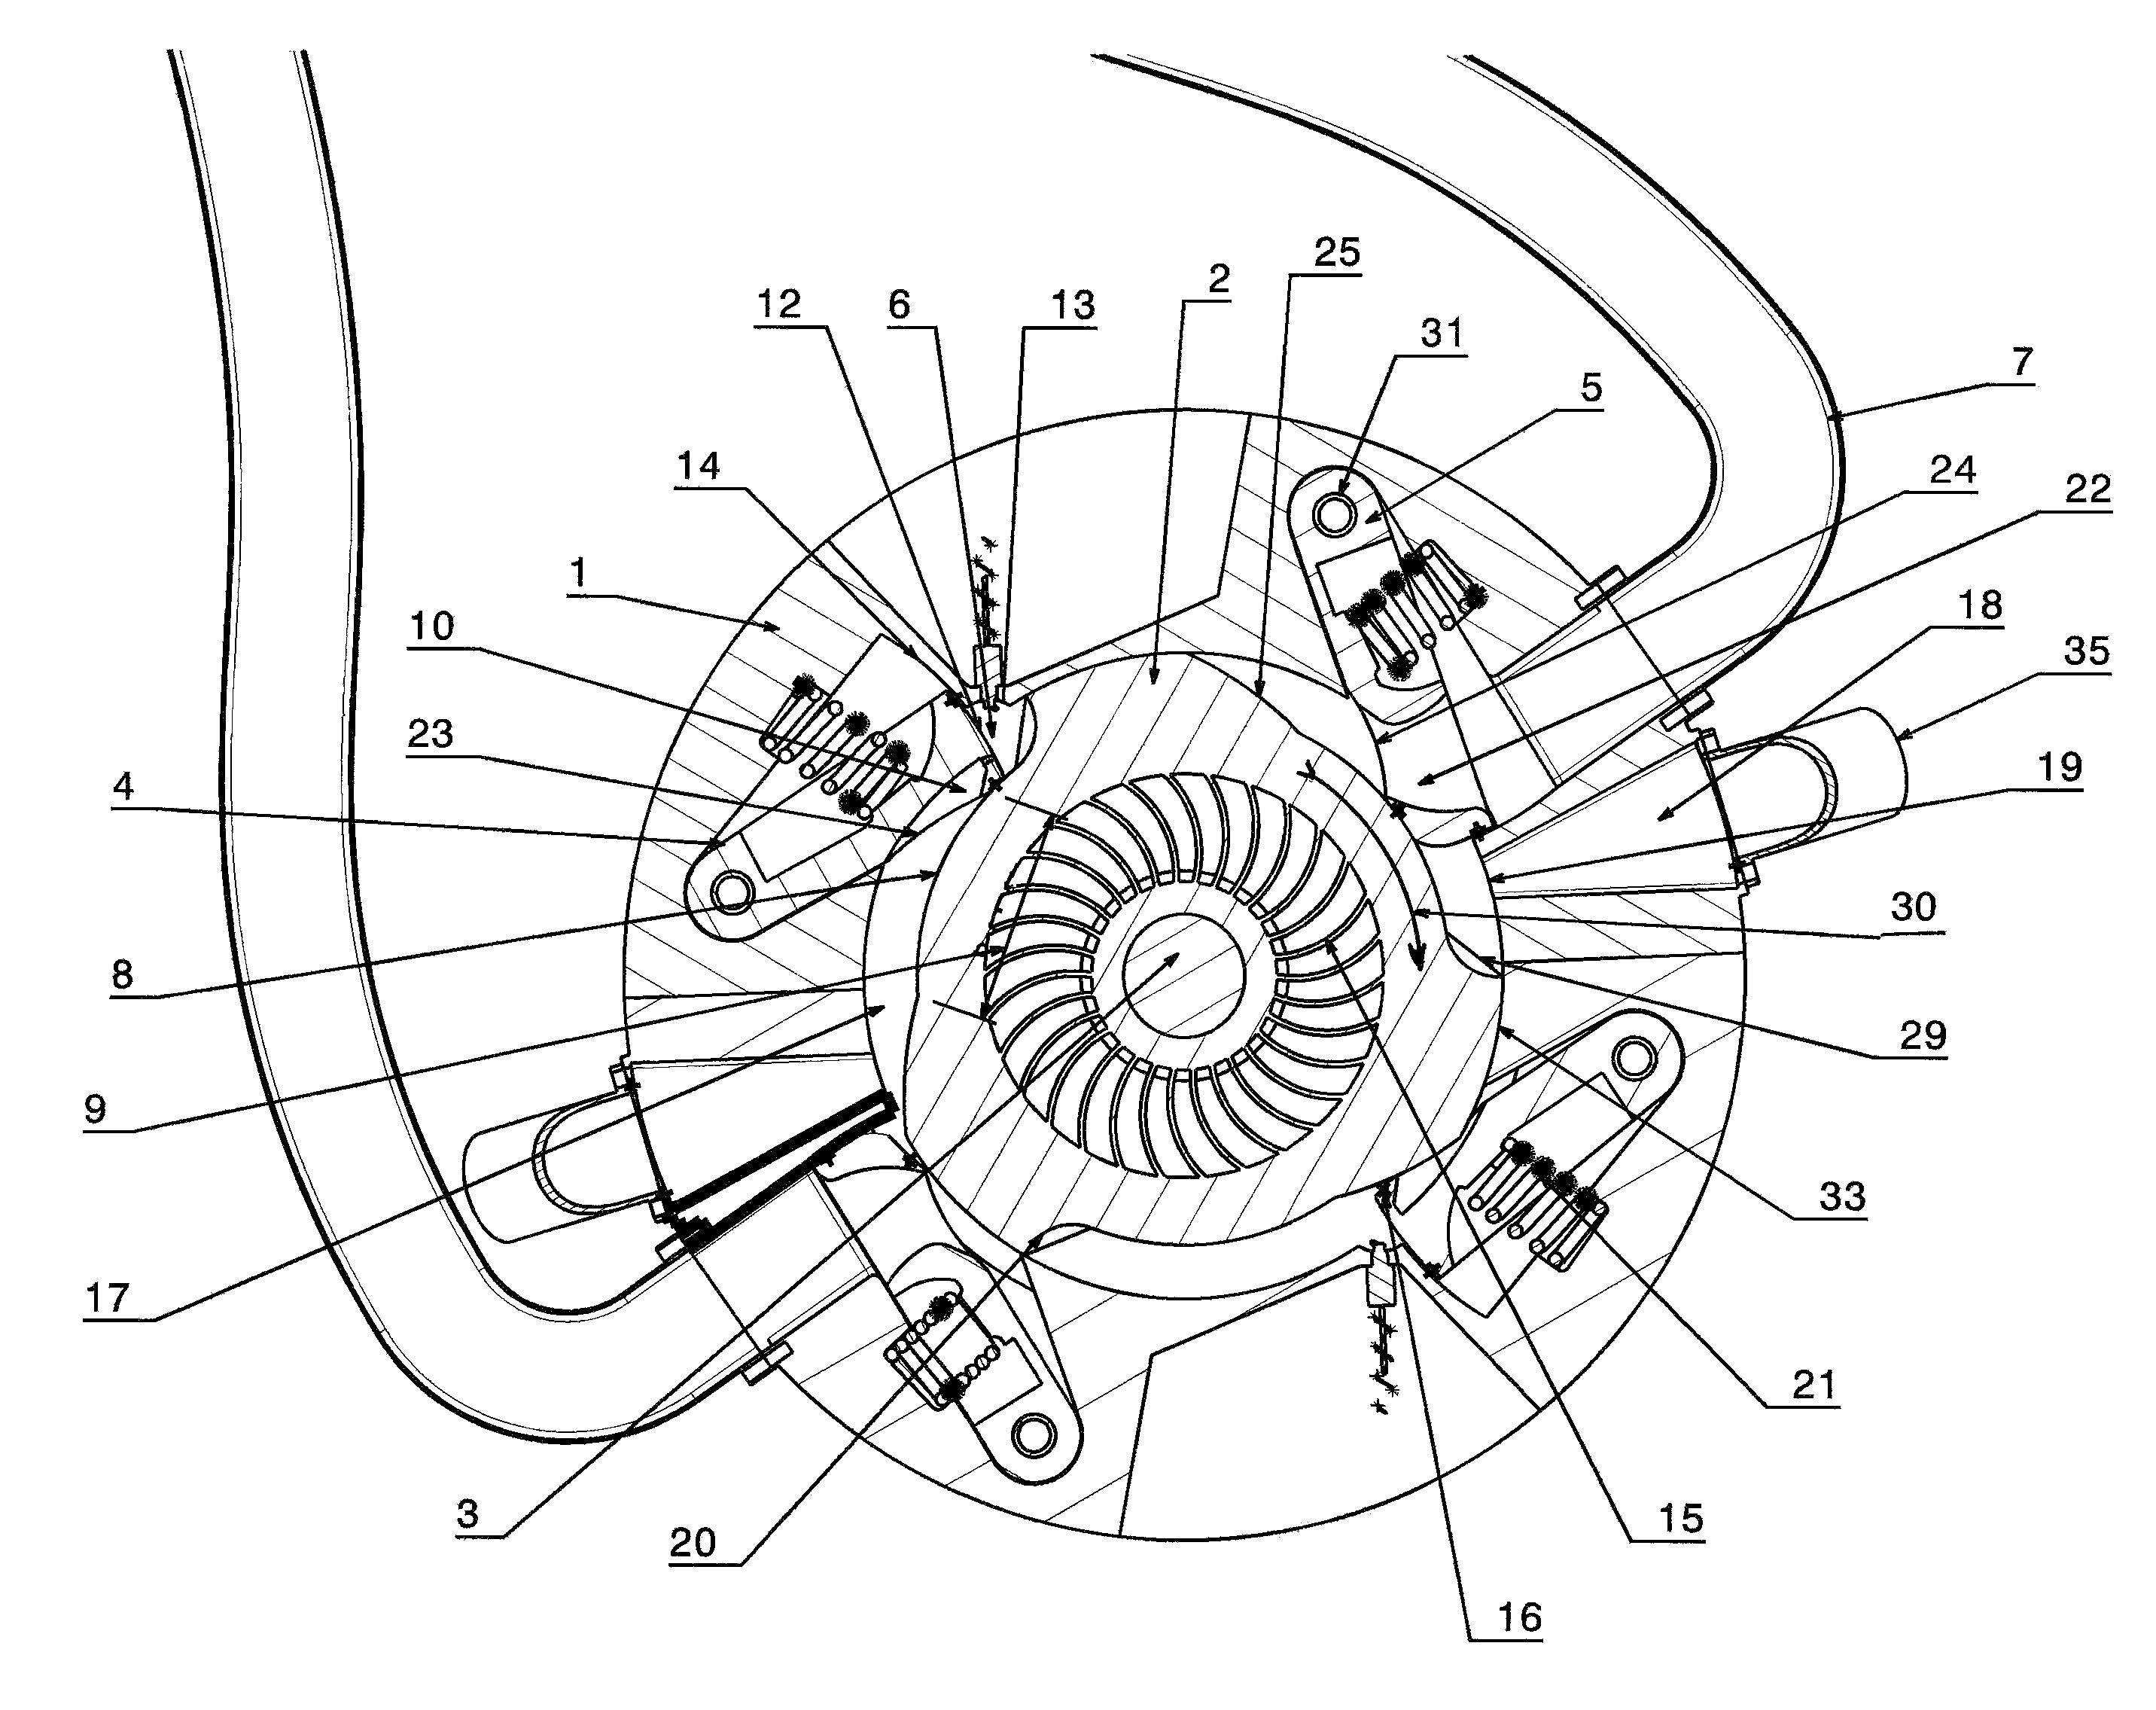 Tangential combustion turbine